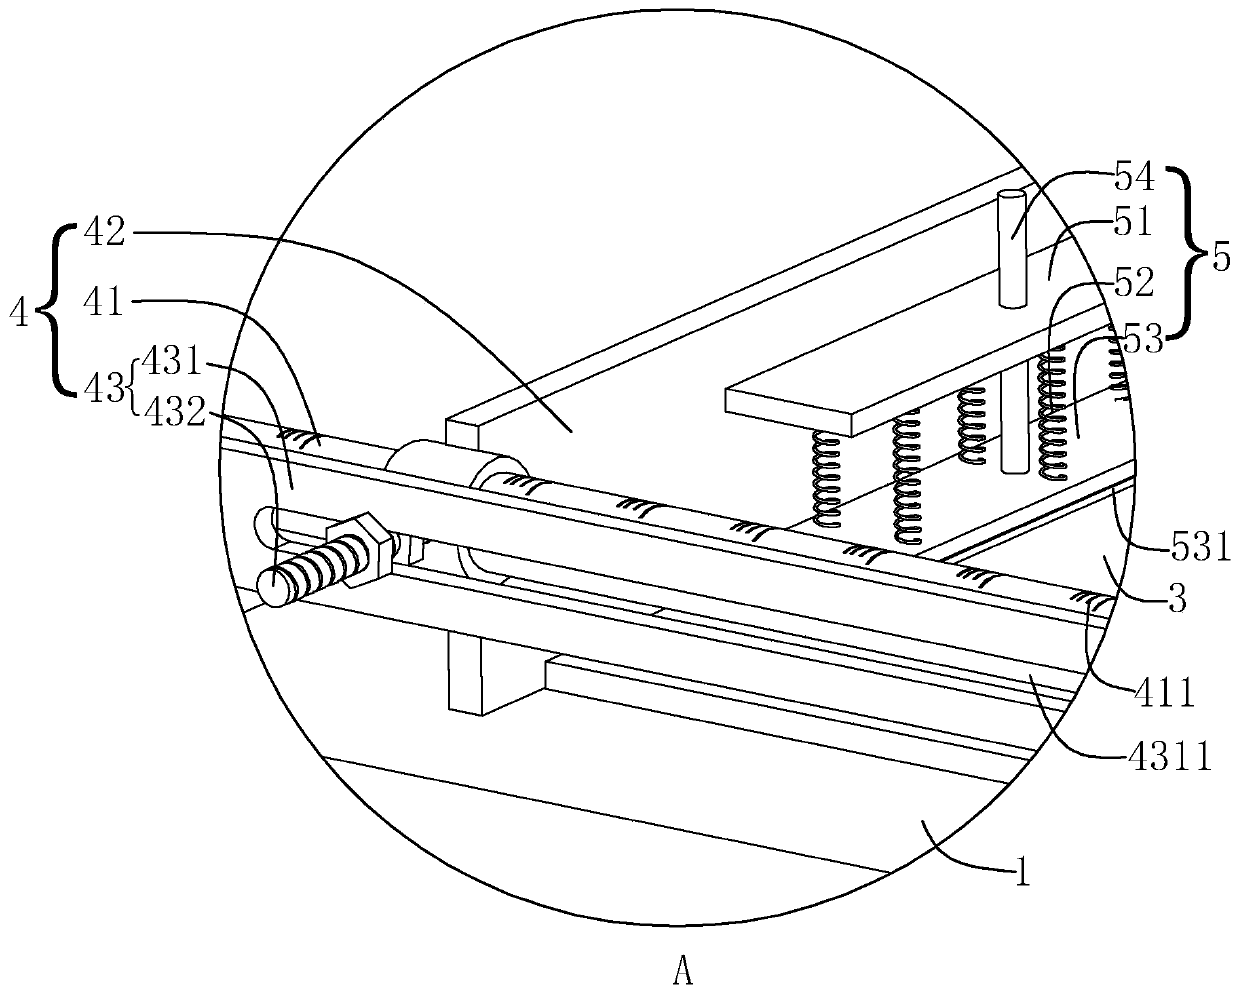 Aluminum cutting system with accurate cutting function